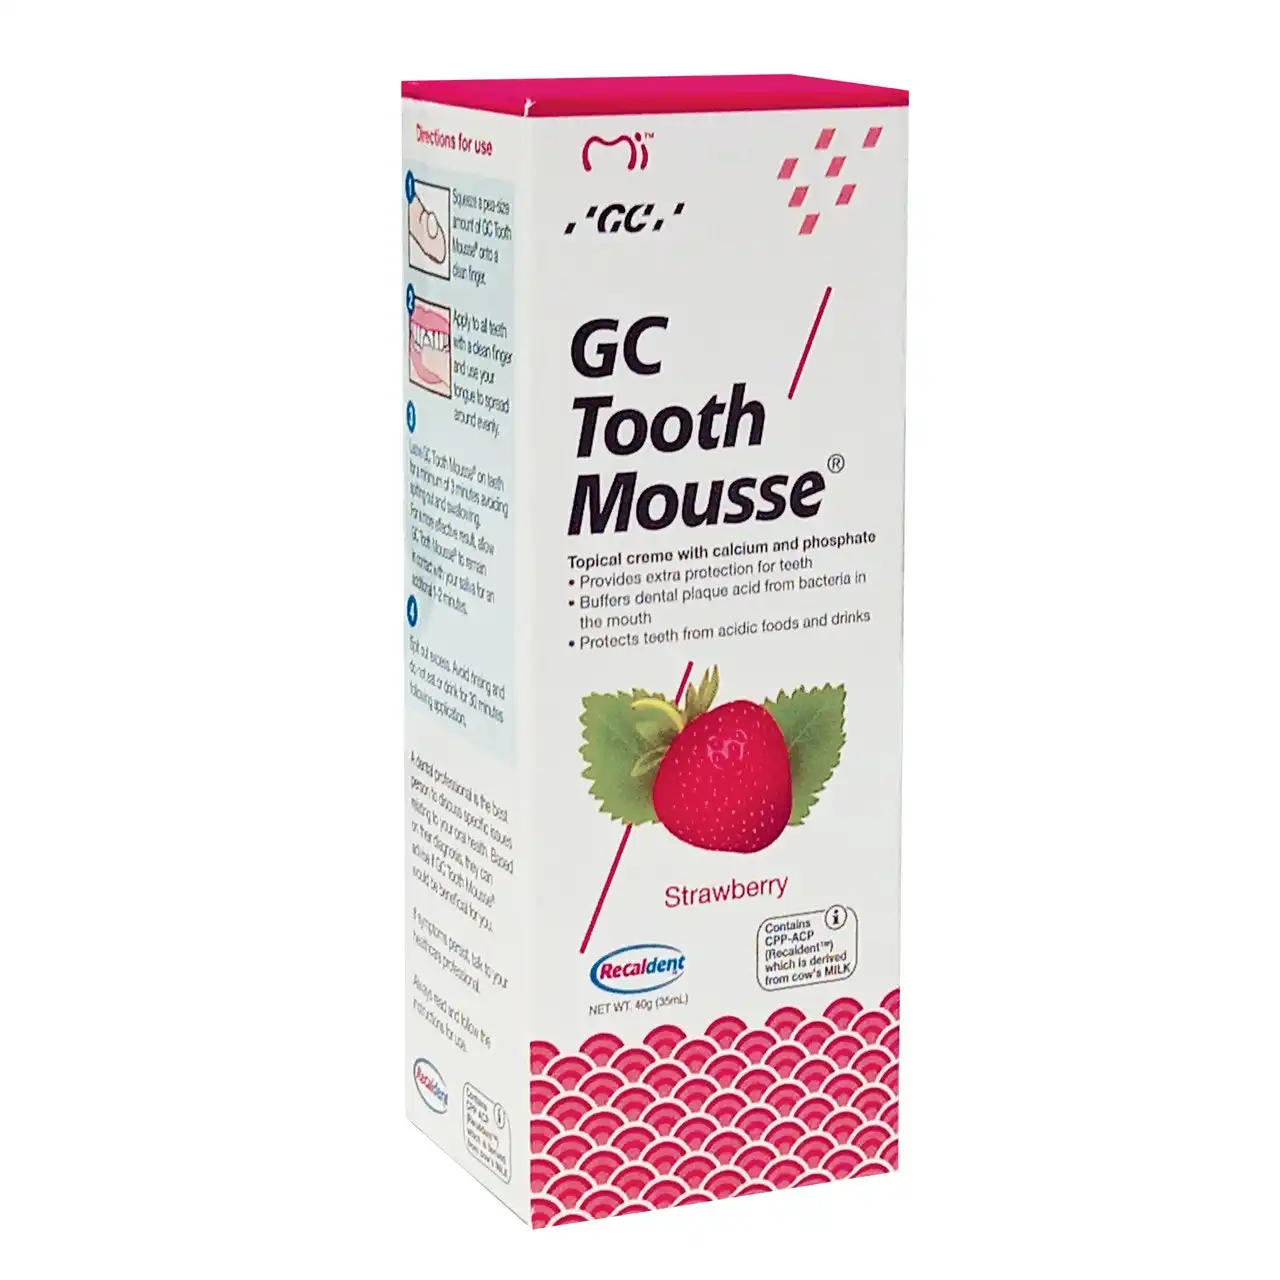 GC Tooth Mousse(TM) Strawberry